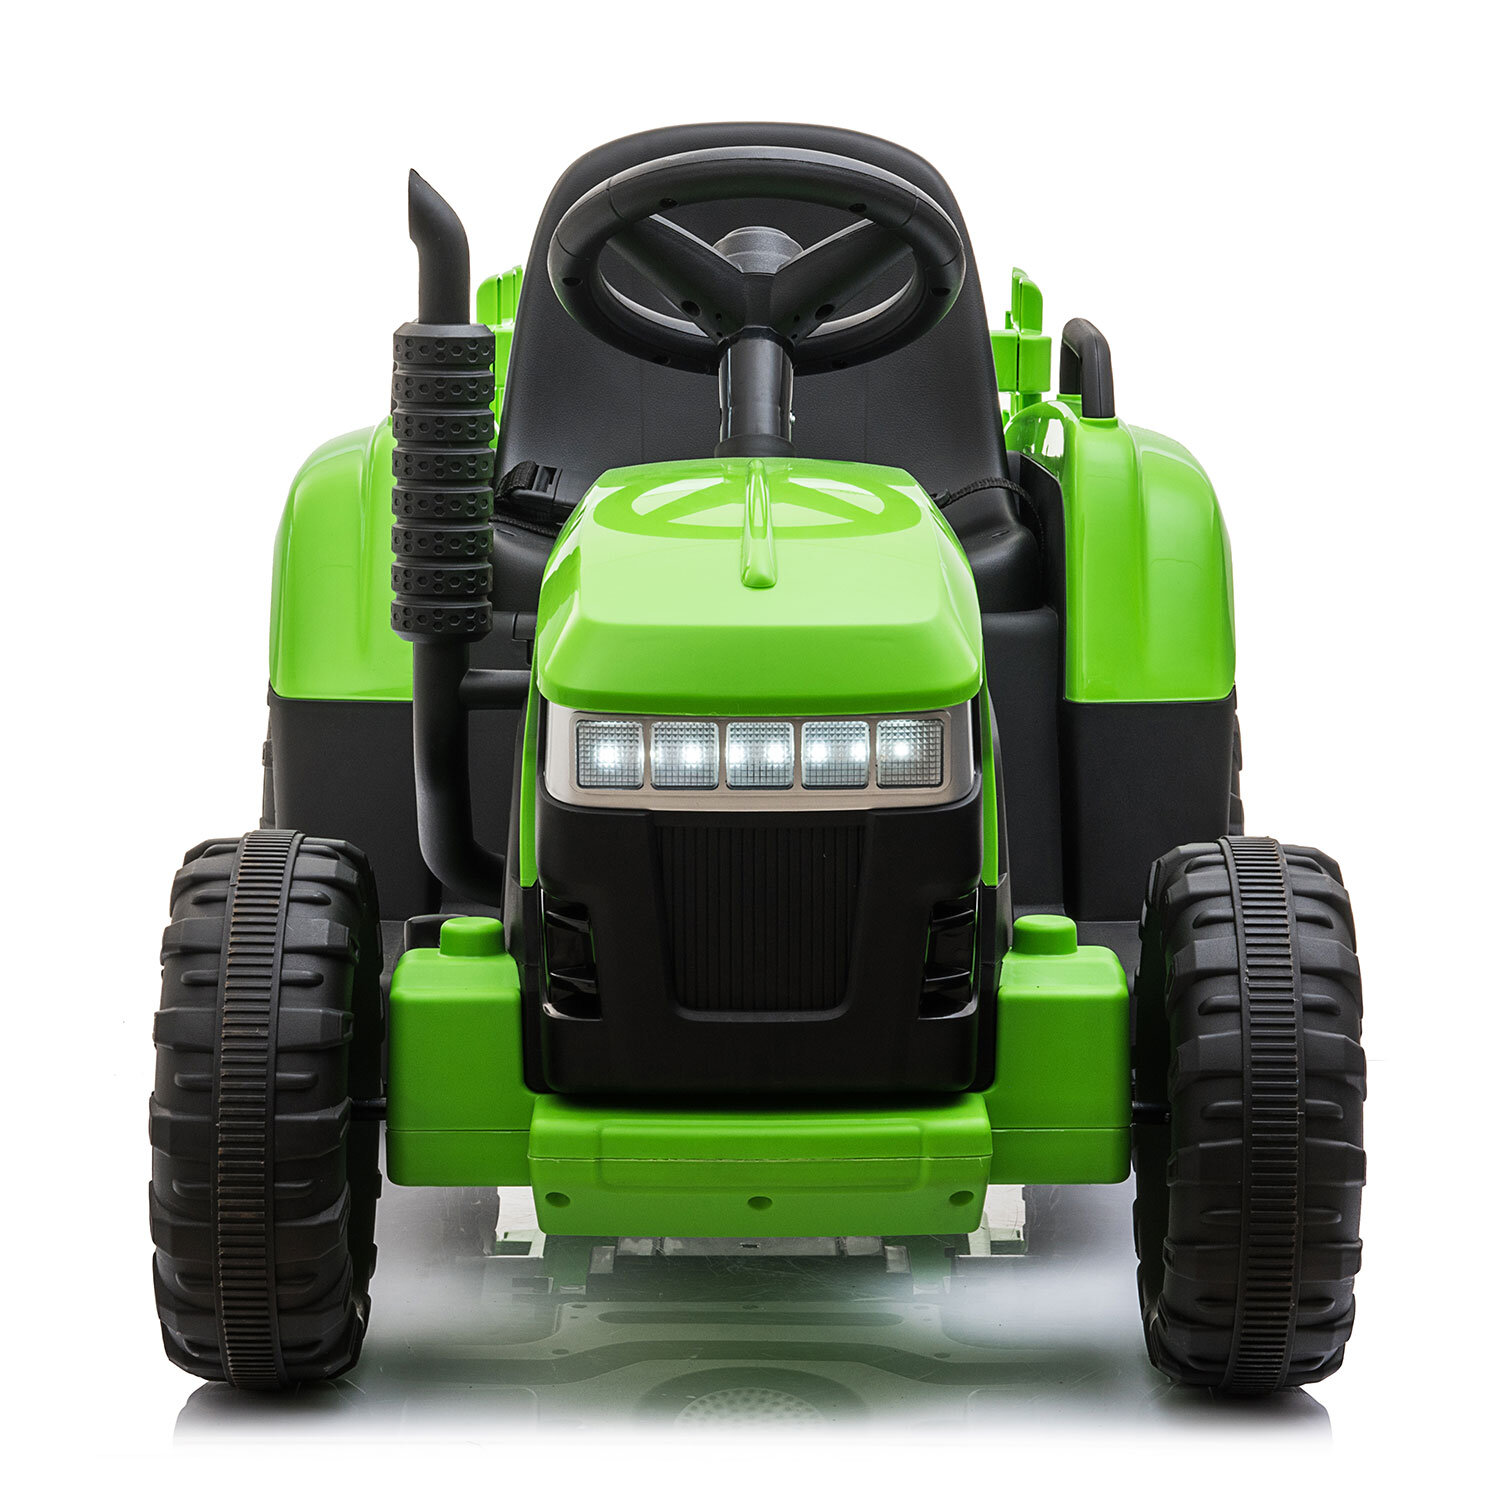 toy riding tractor battery powered